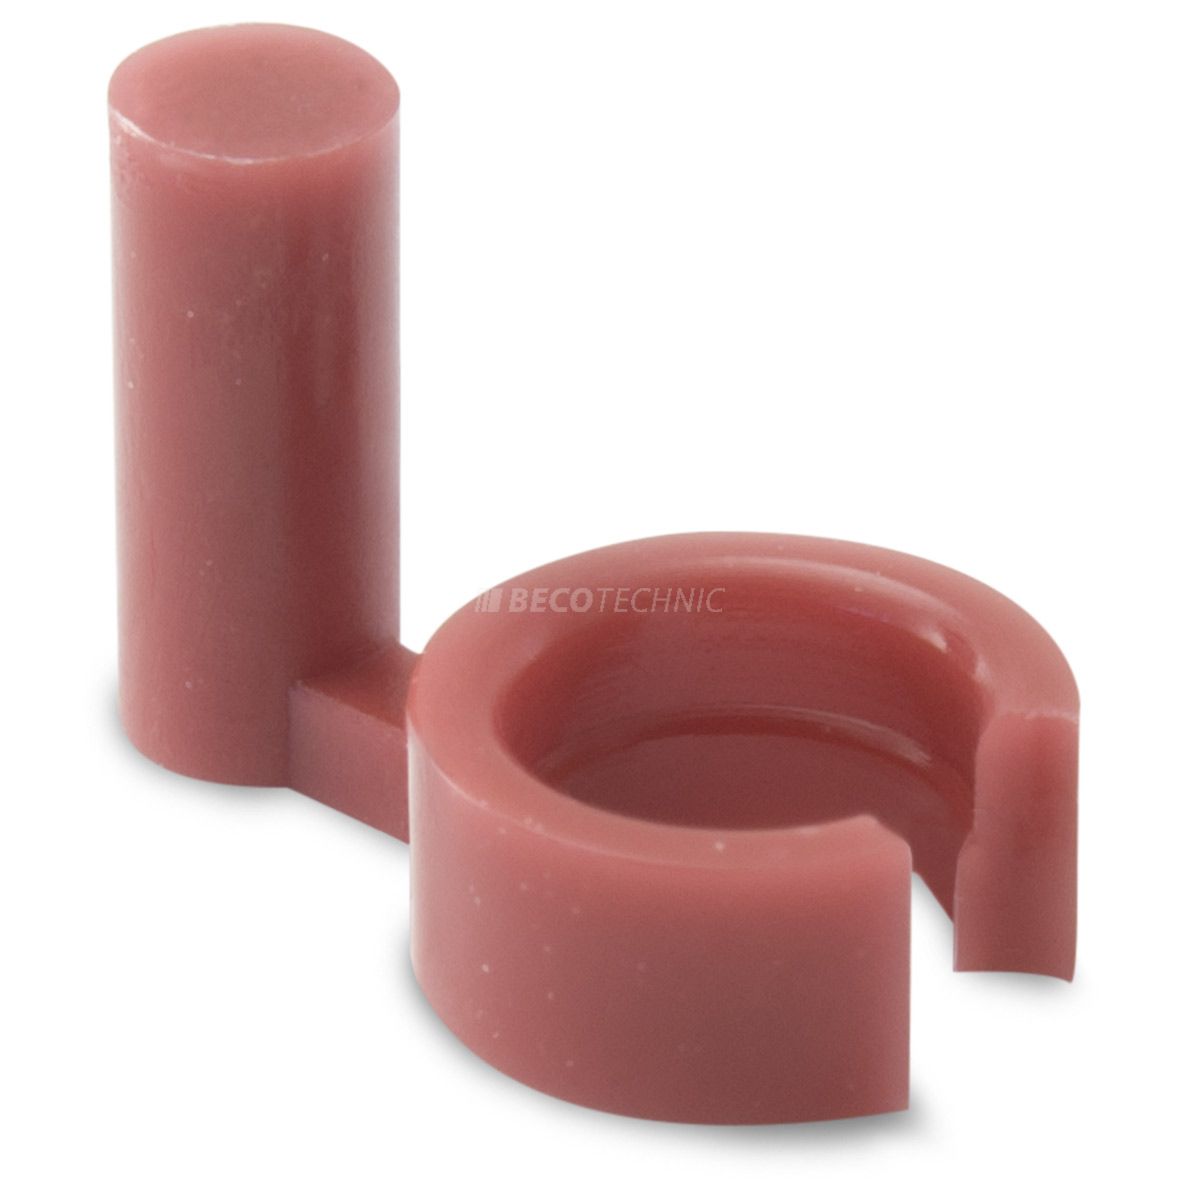 Watch stopper, plastic, red, thickness 2 mm, 1000 pieces